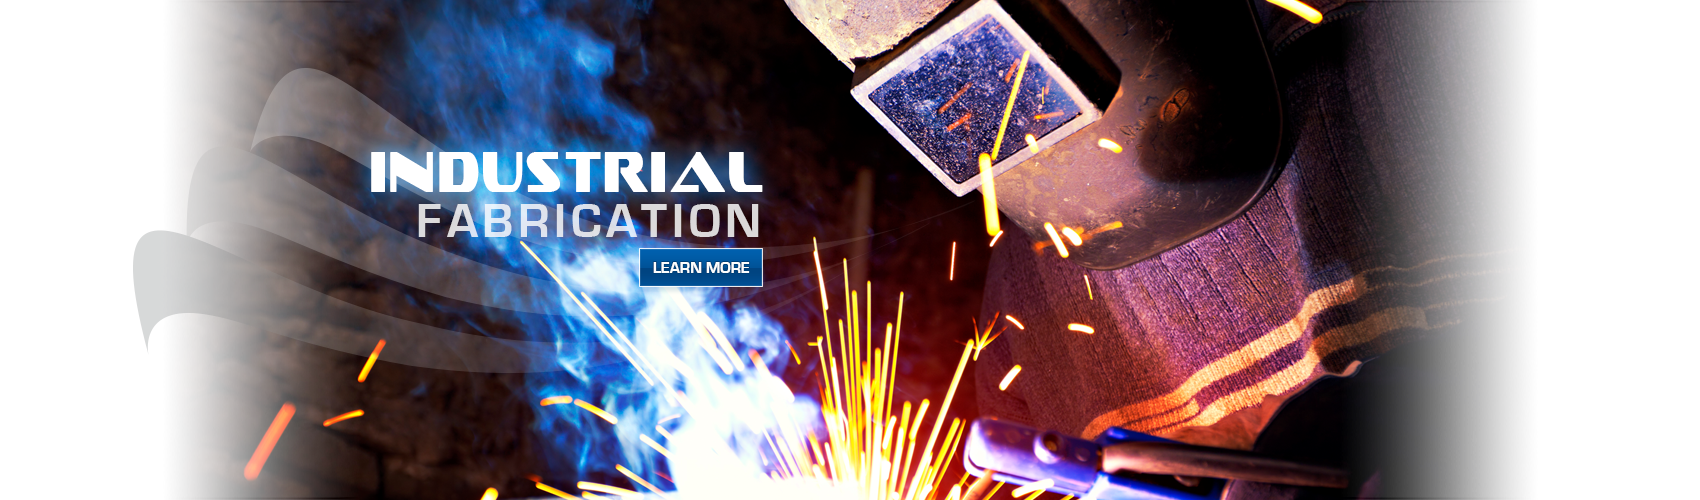 industrial-fabrication